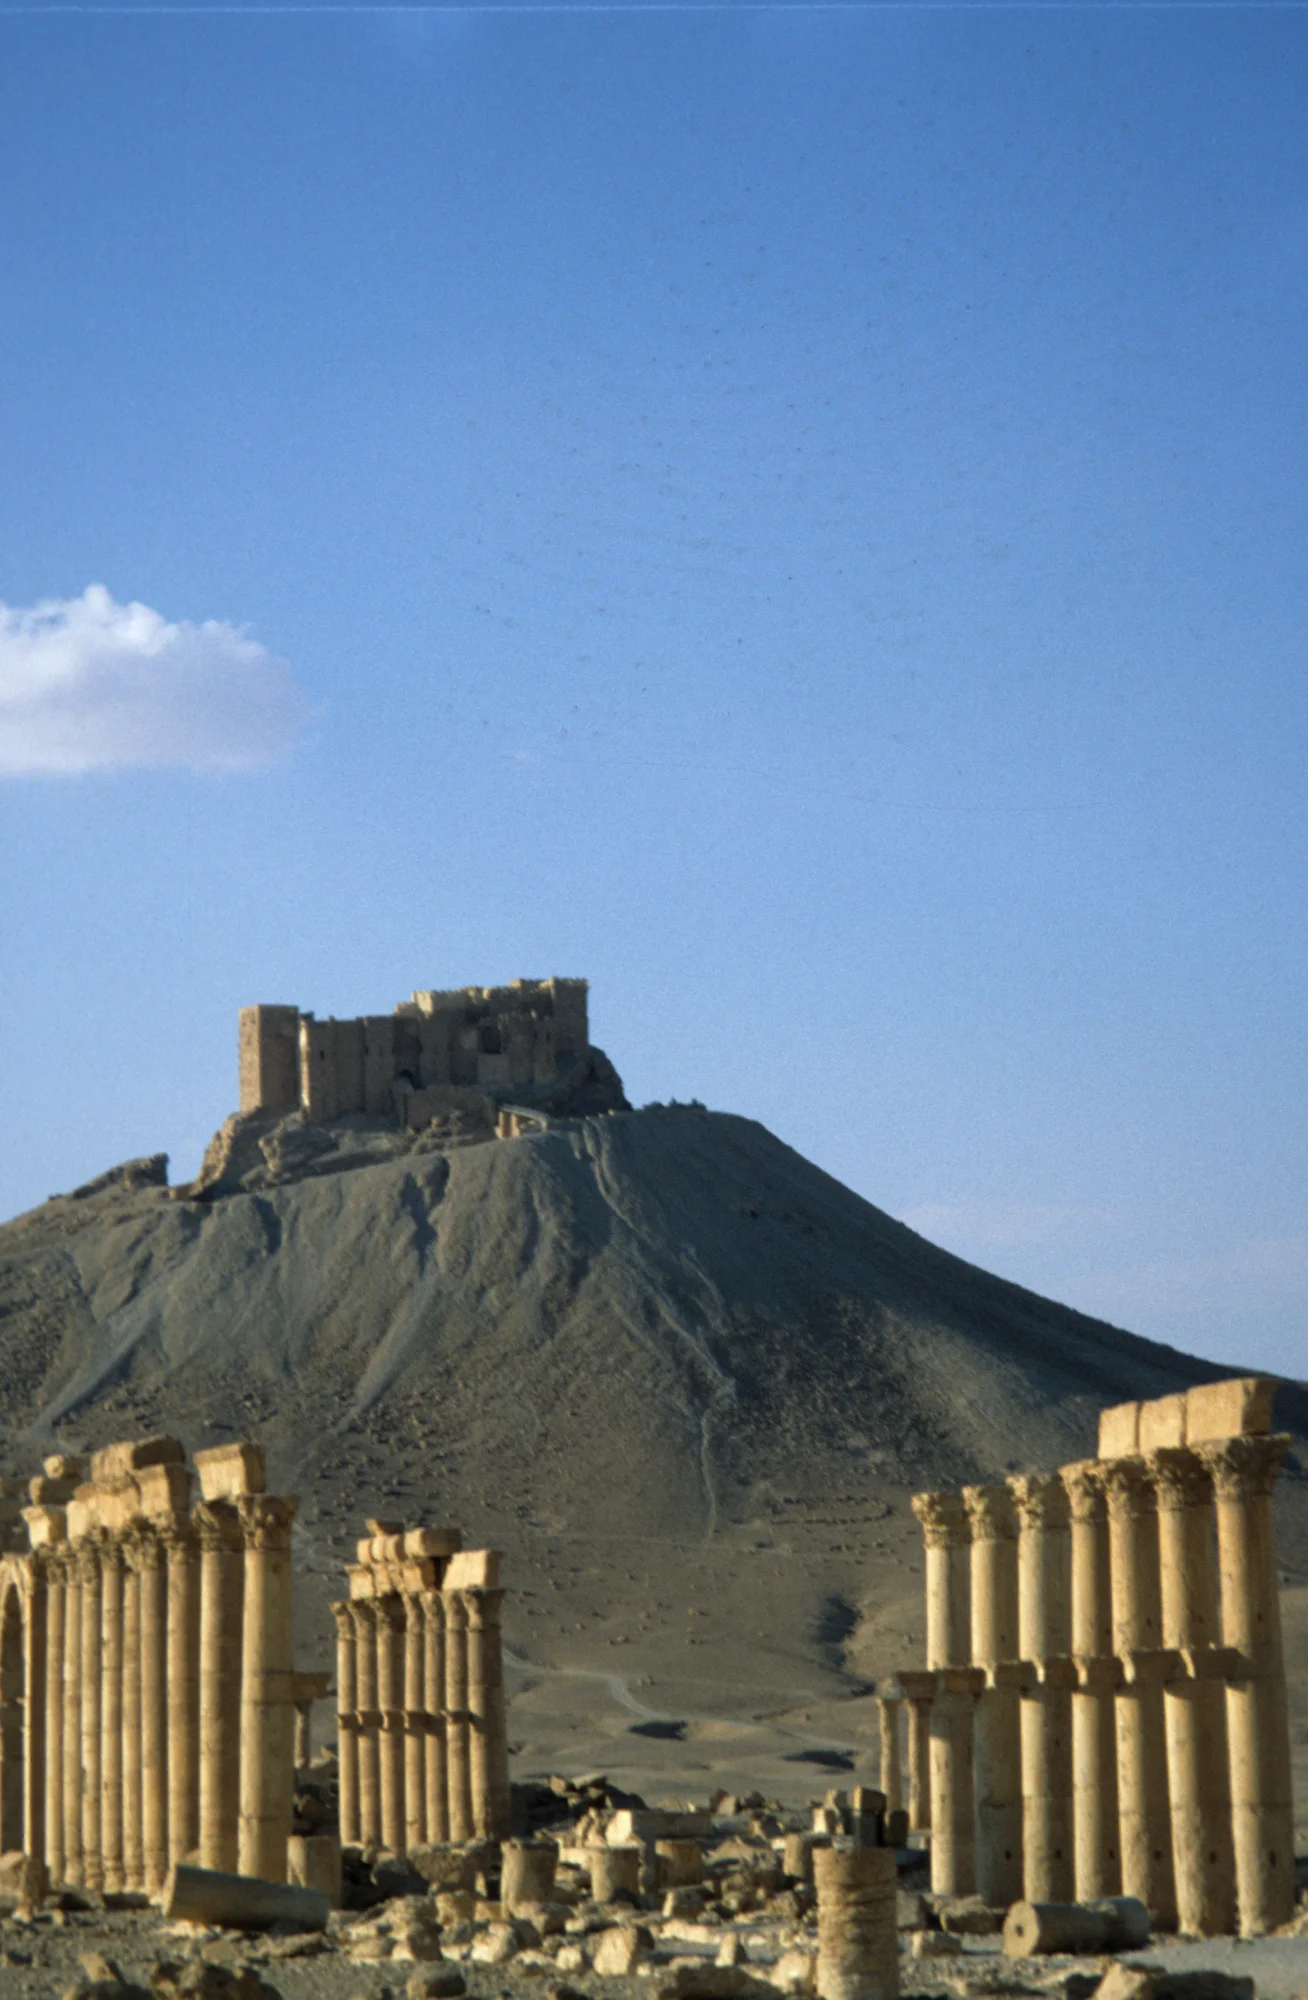 Palmyra, Colonnaded axis and Qalʿat Ibn Mʿan in the back